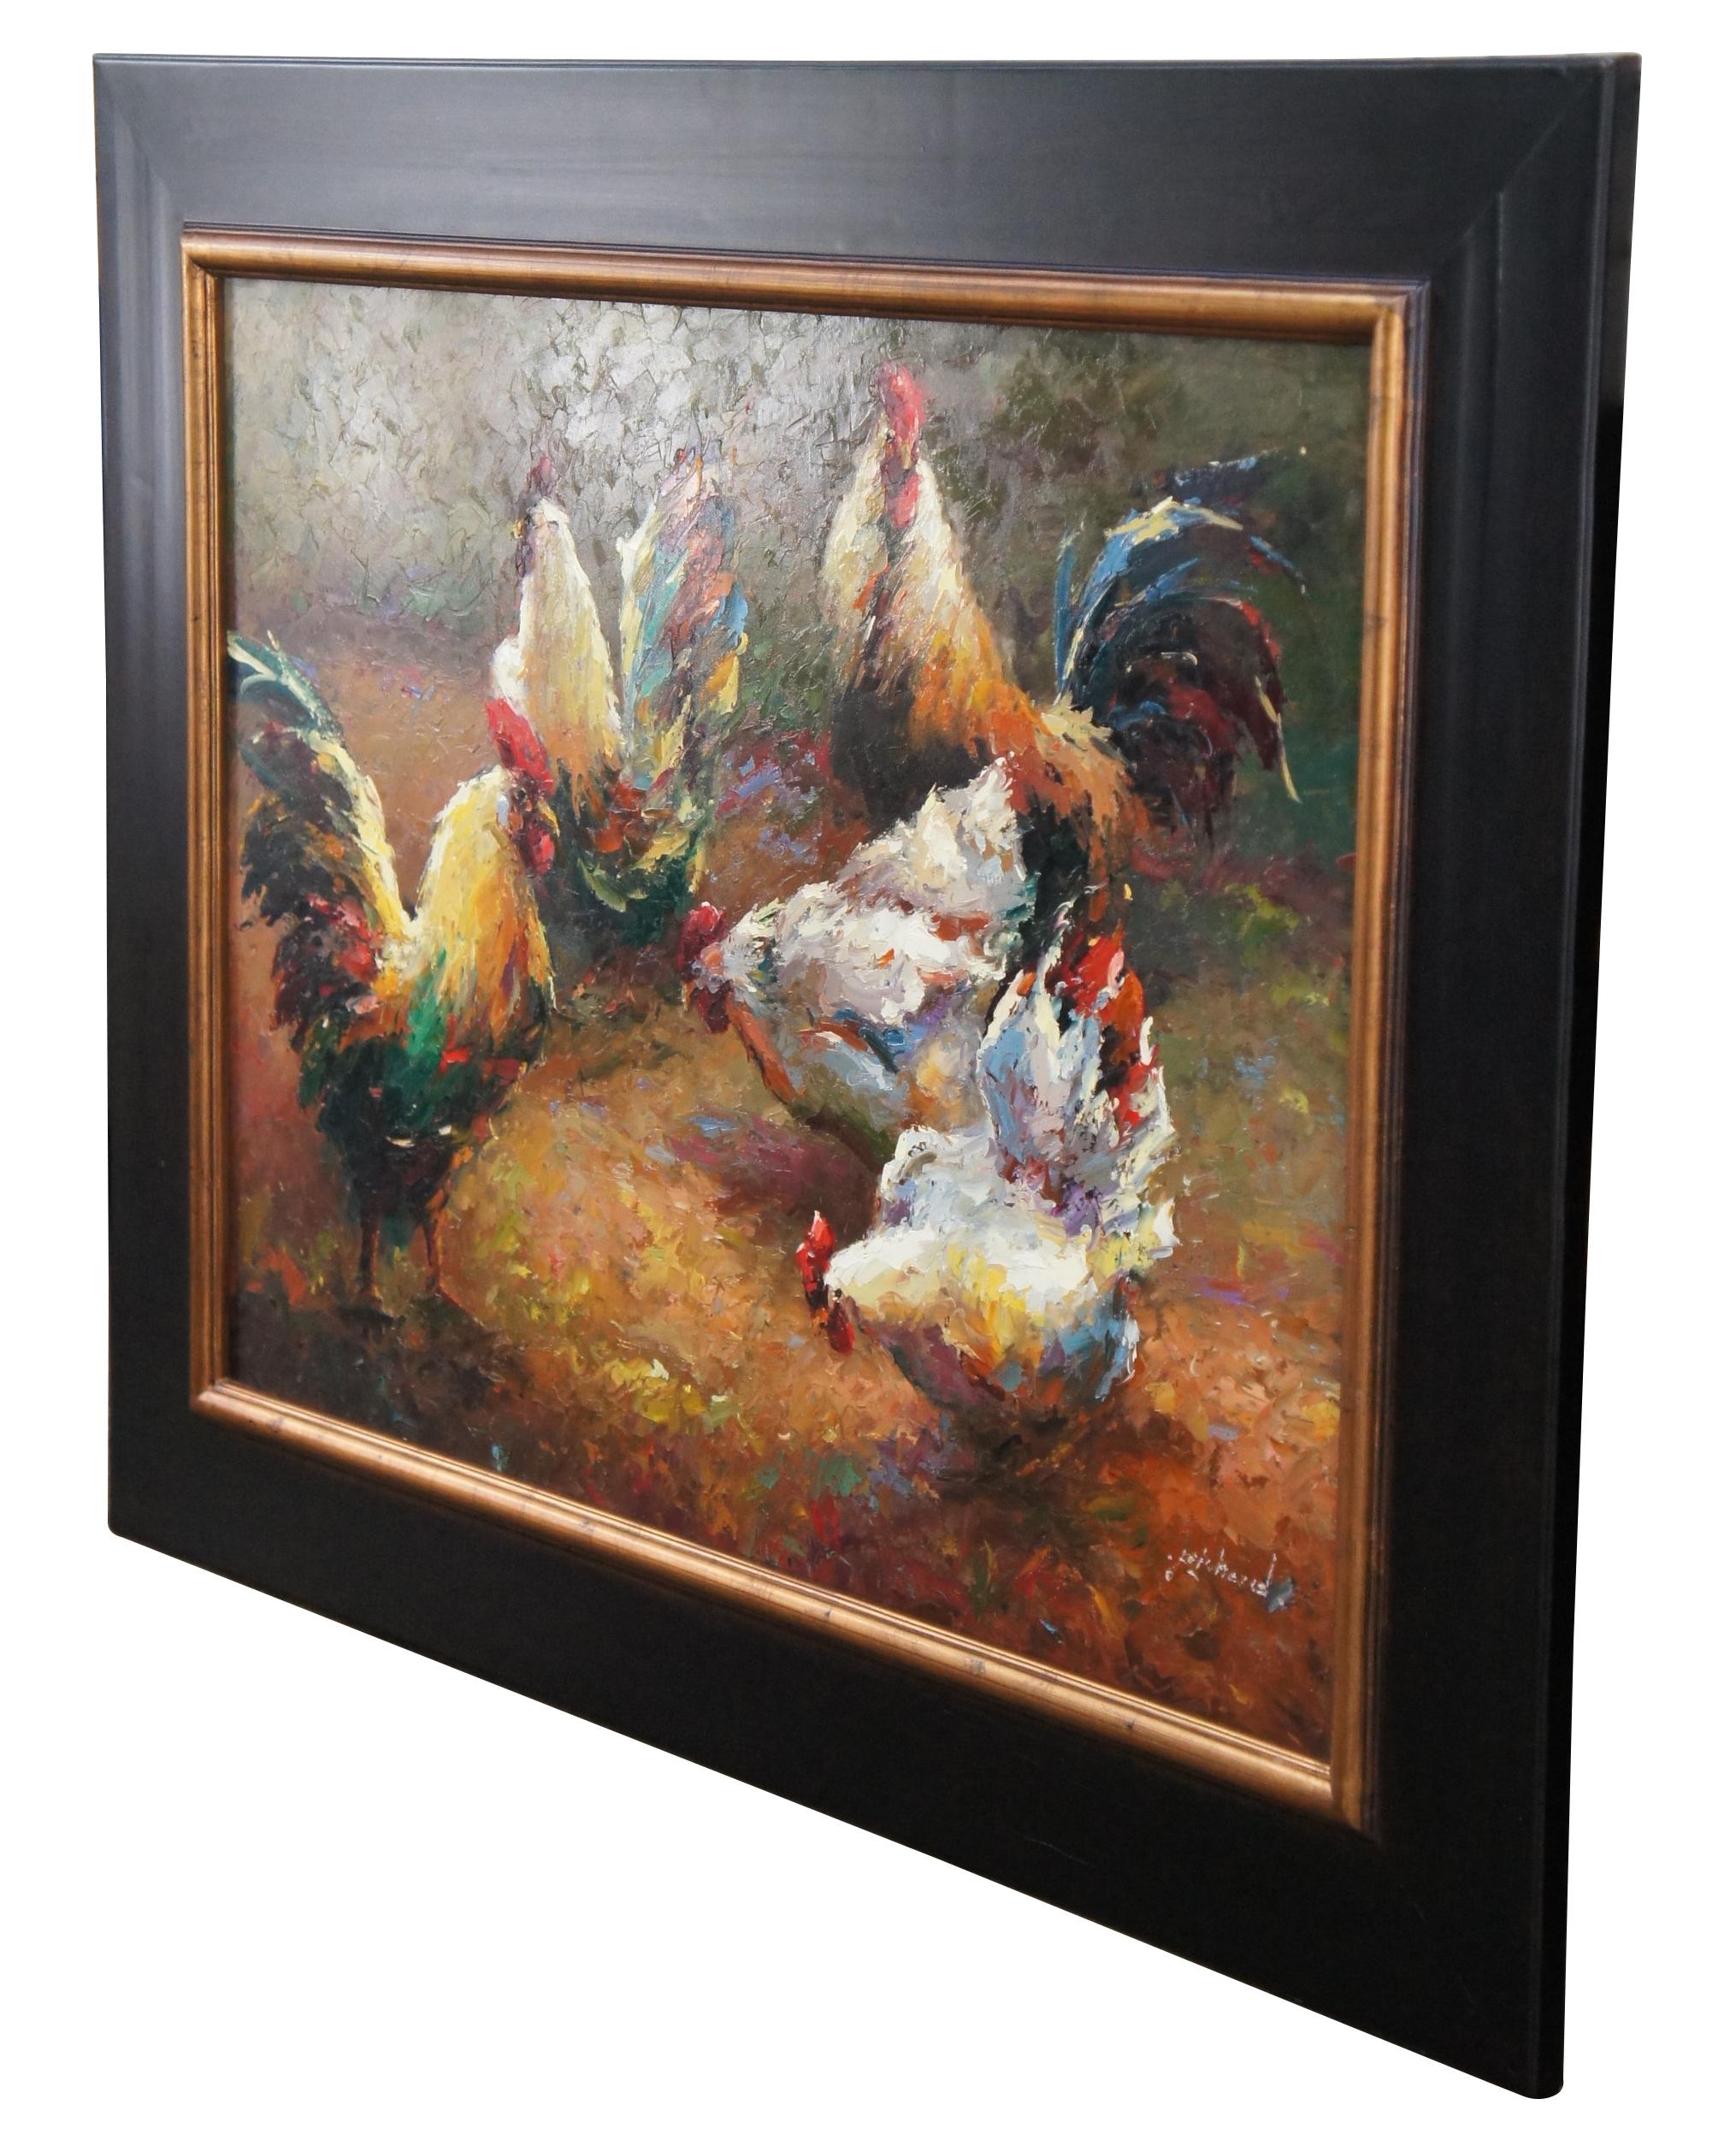 Large vintage Impressionist country farmhouse oil painting featuring five chickens / roosters / hens / birds in a colorful spectrum of light. Signed lower right. 

Dimensions: 
50.5